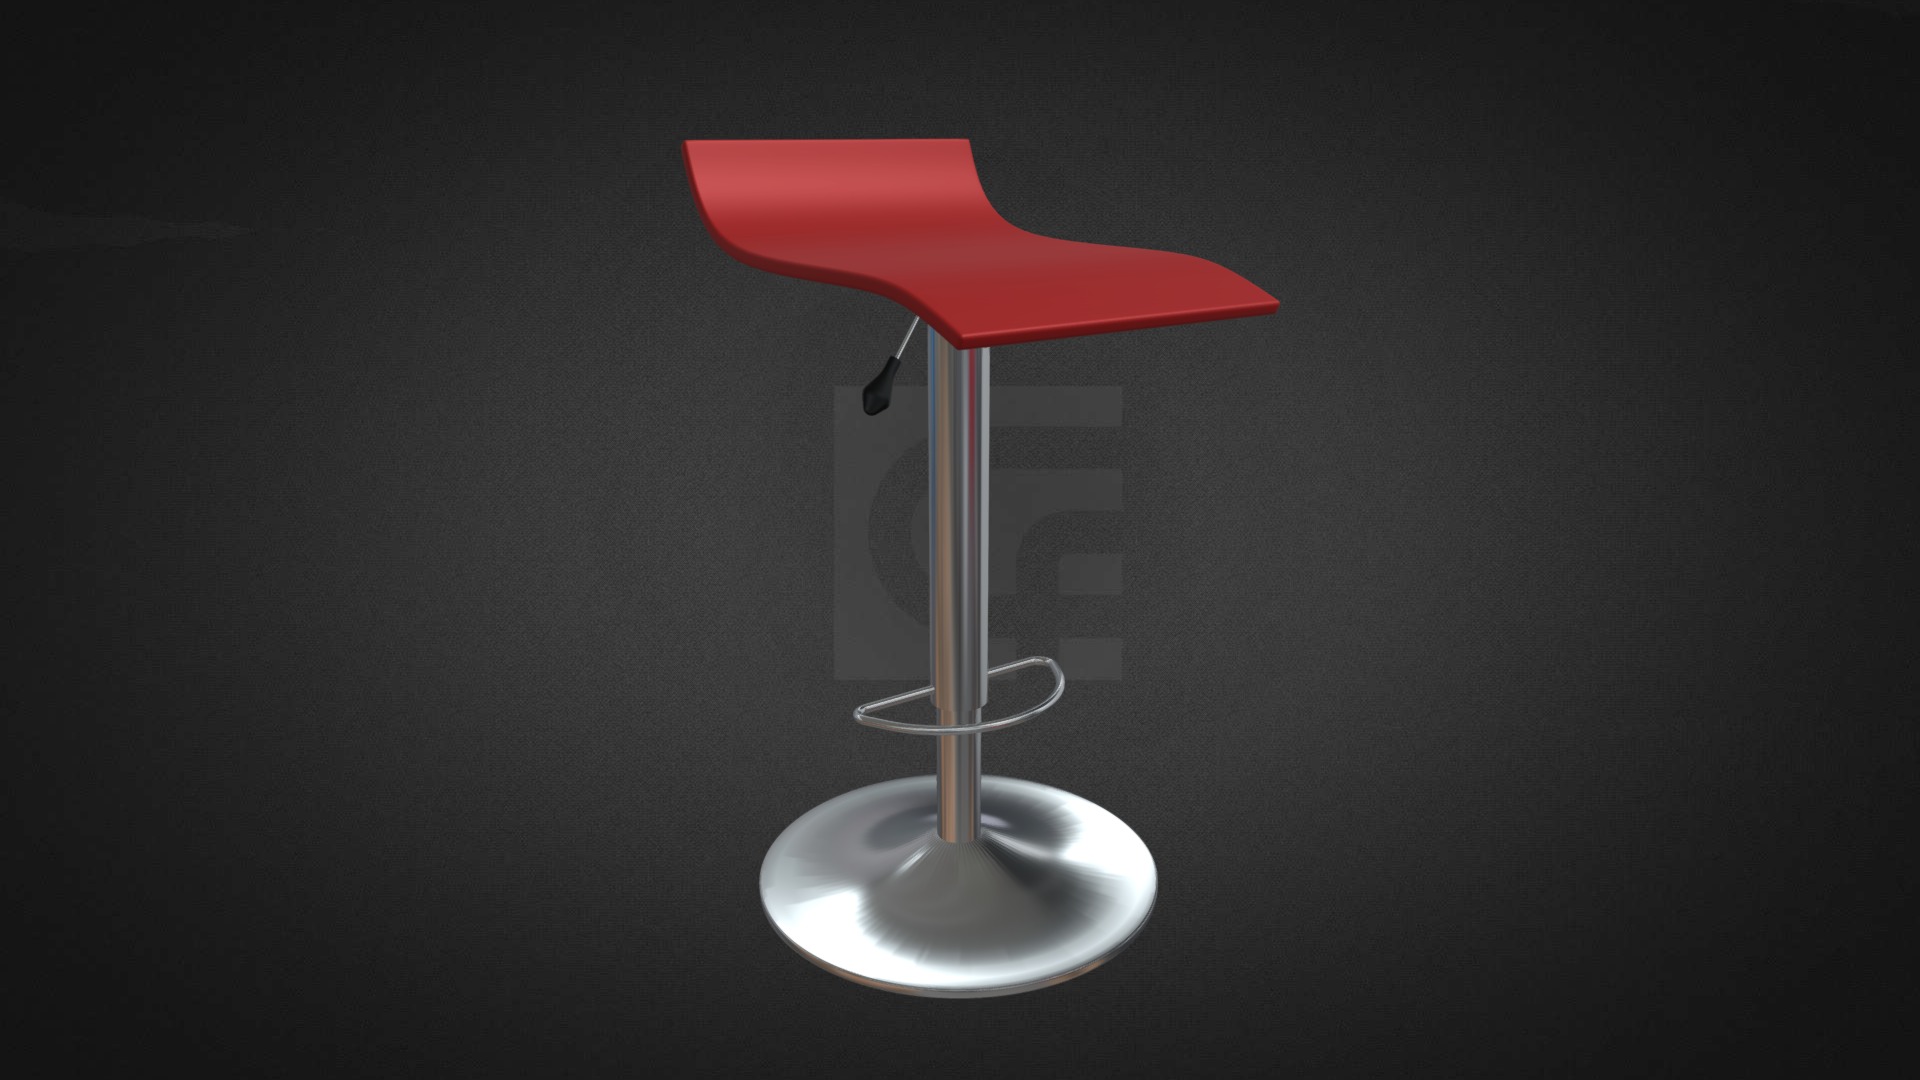 3D model Viper Stool Hire - This is a 3D model of the Viper Stool Hire. The 3D model is about a red and white lamp.